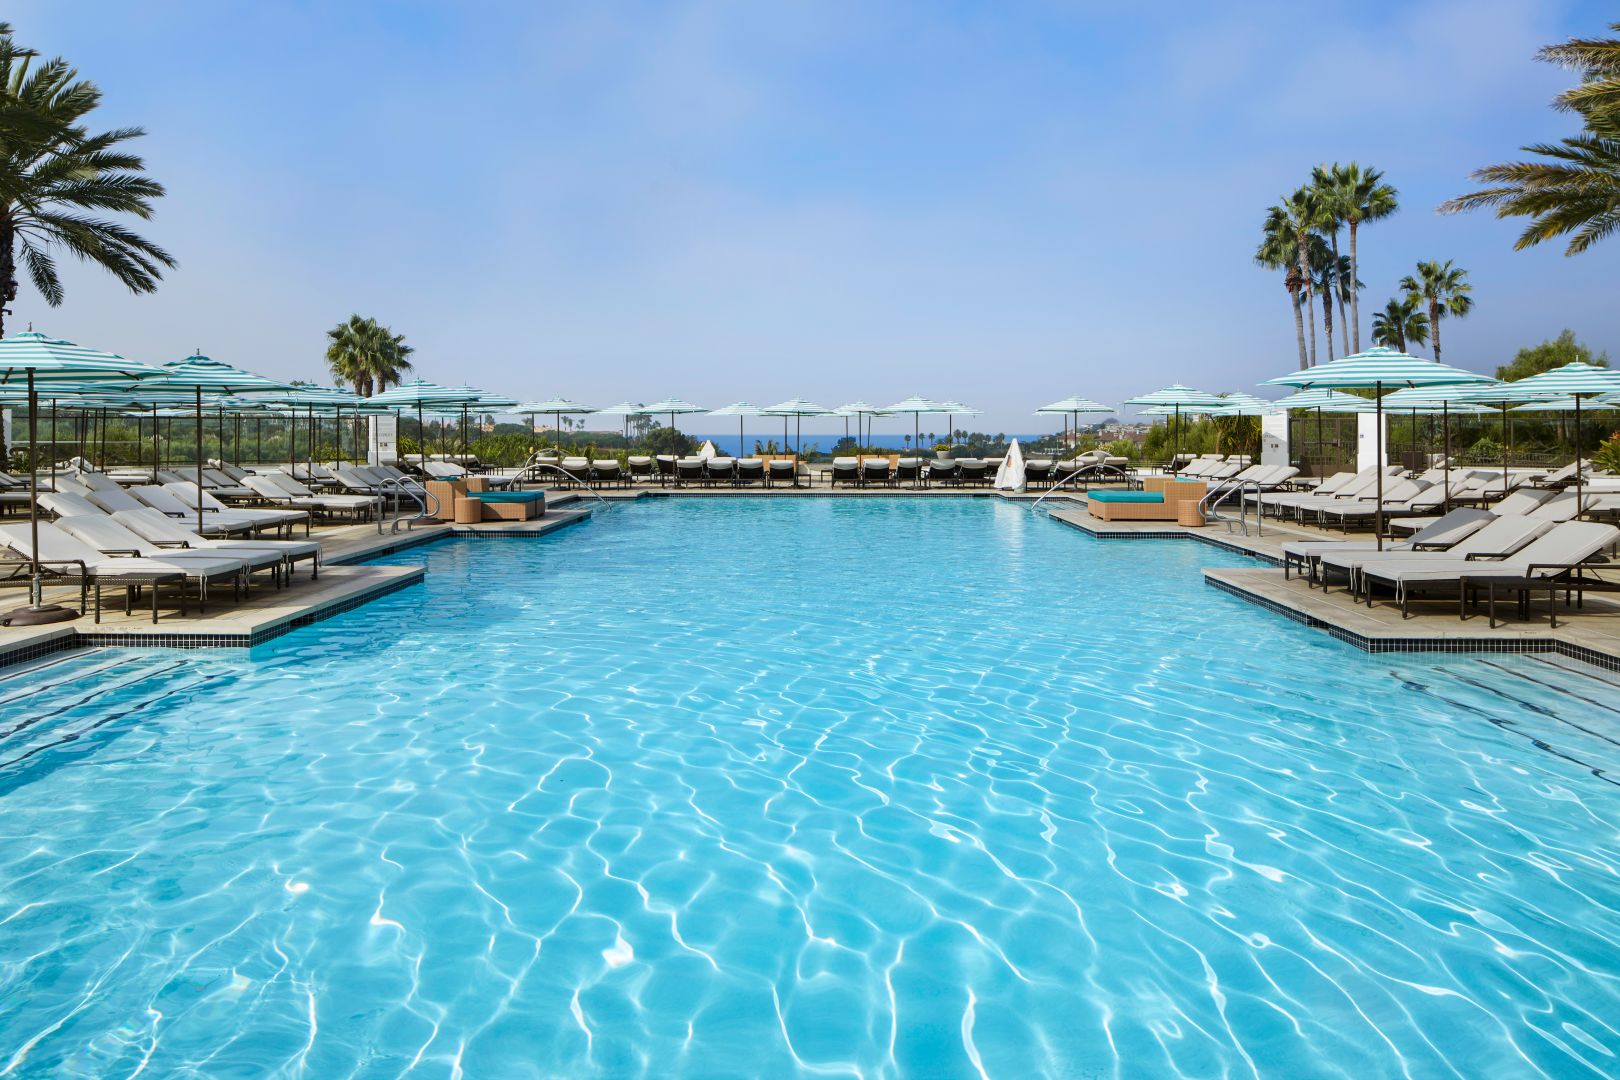 The pool at Waldorf Astoria Monarch Beach Resort. It is surrounded by white lounge chairs and blue umbrellas. Spring is the perfect time for whale watching nearby